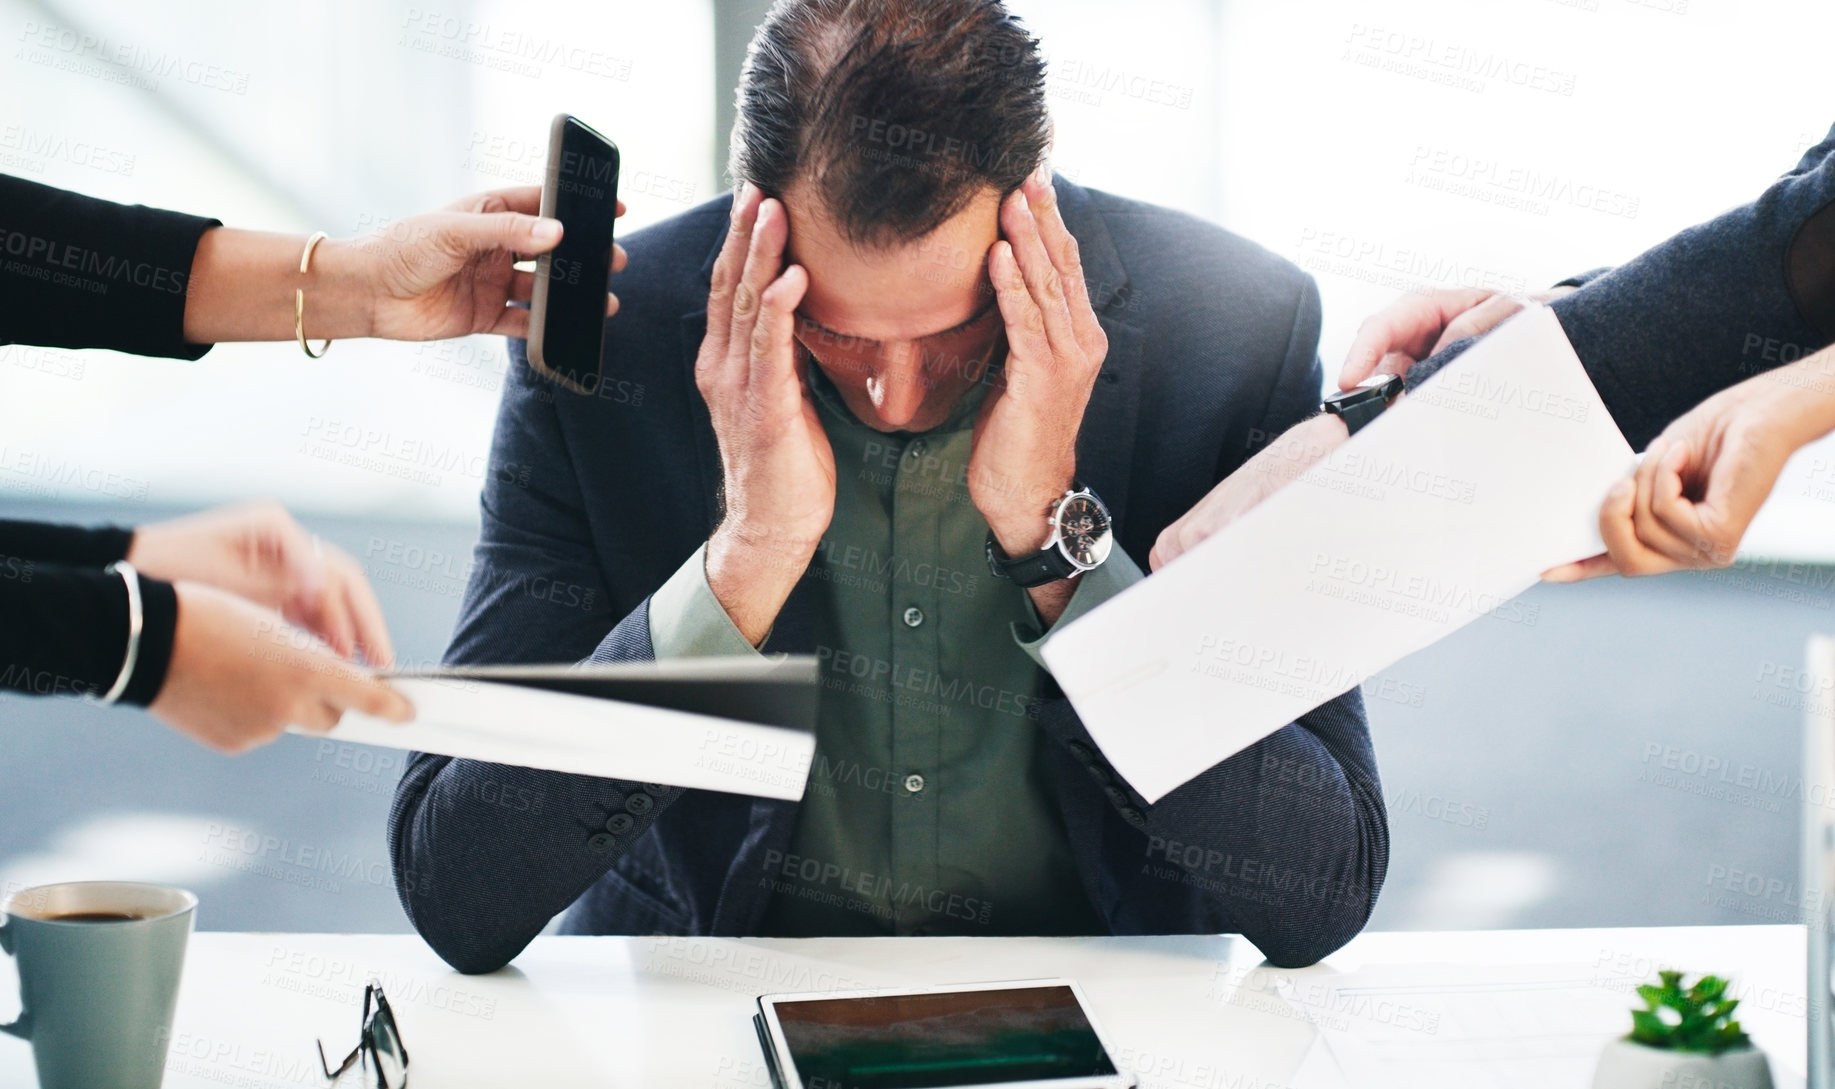 Buy stock photo Anxiety, stress or burnout of management in office at bank with schedule conflict, fail or mistake. Tired, challenge or exhausted bank manager at corporate desk overwhelmed with work overload.